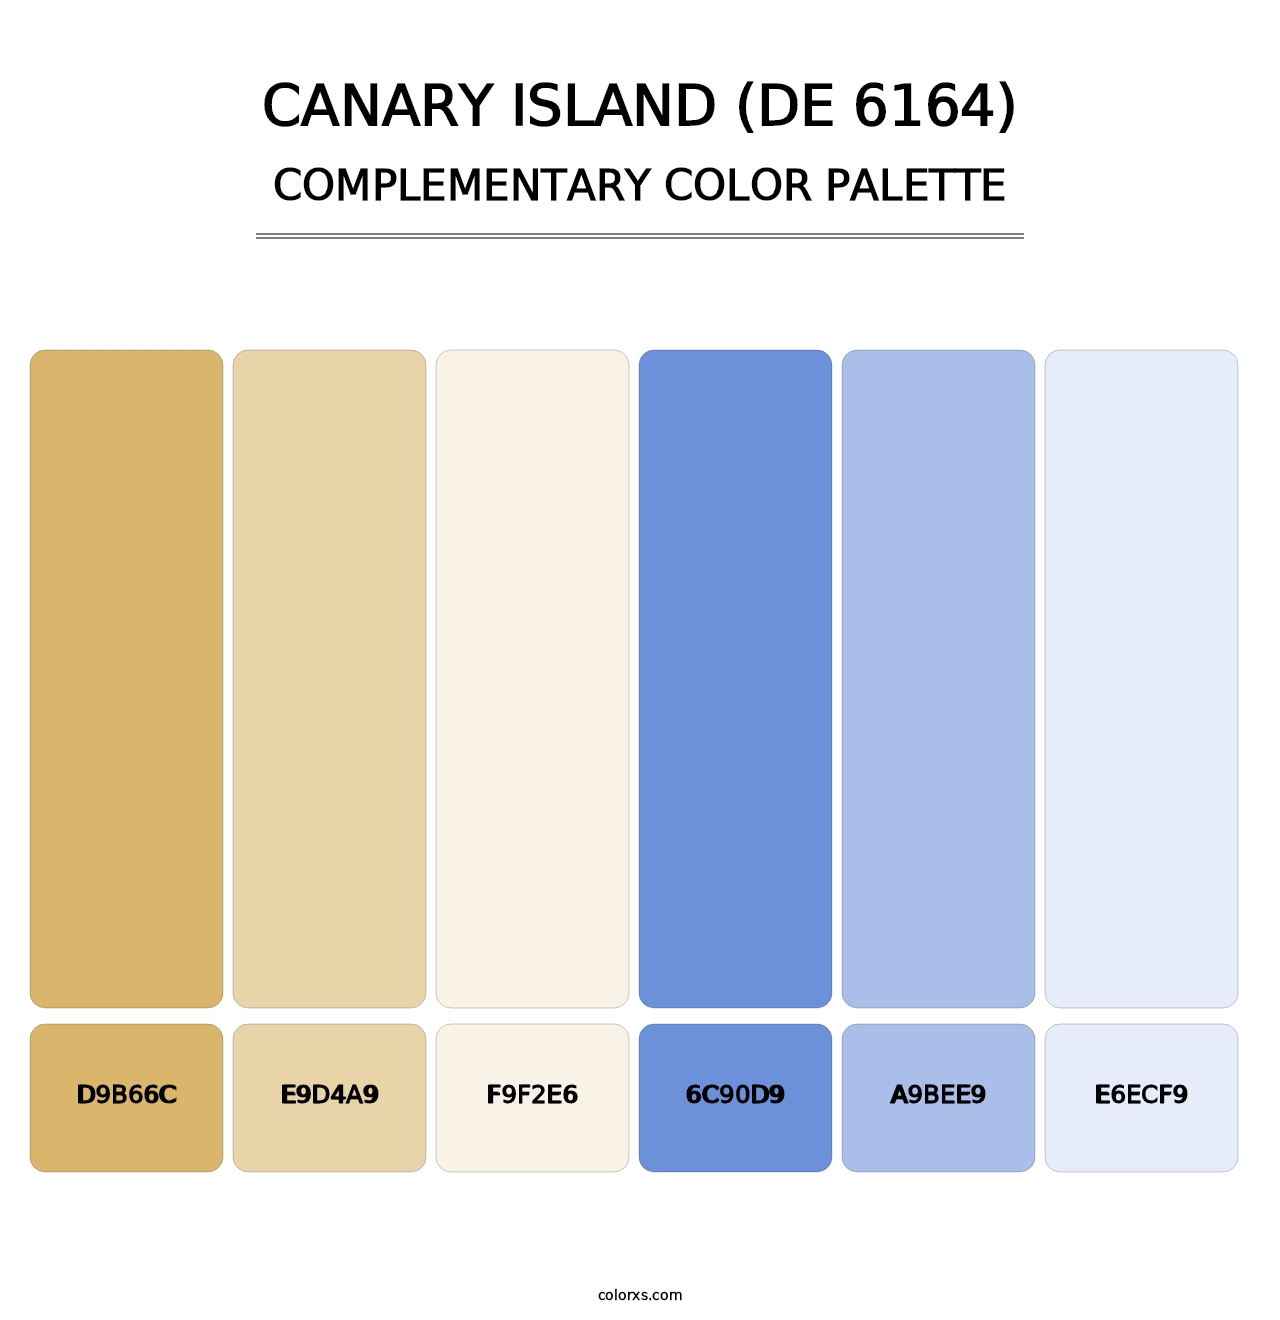 Canary Island (DE 6164) - Complementary Color Palette